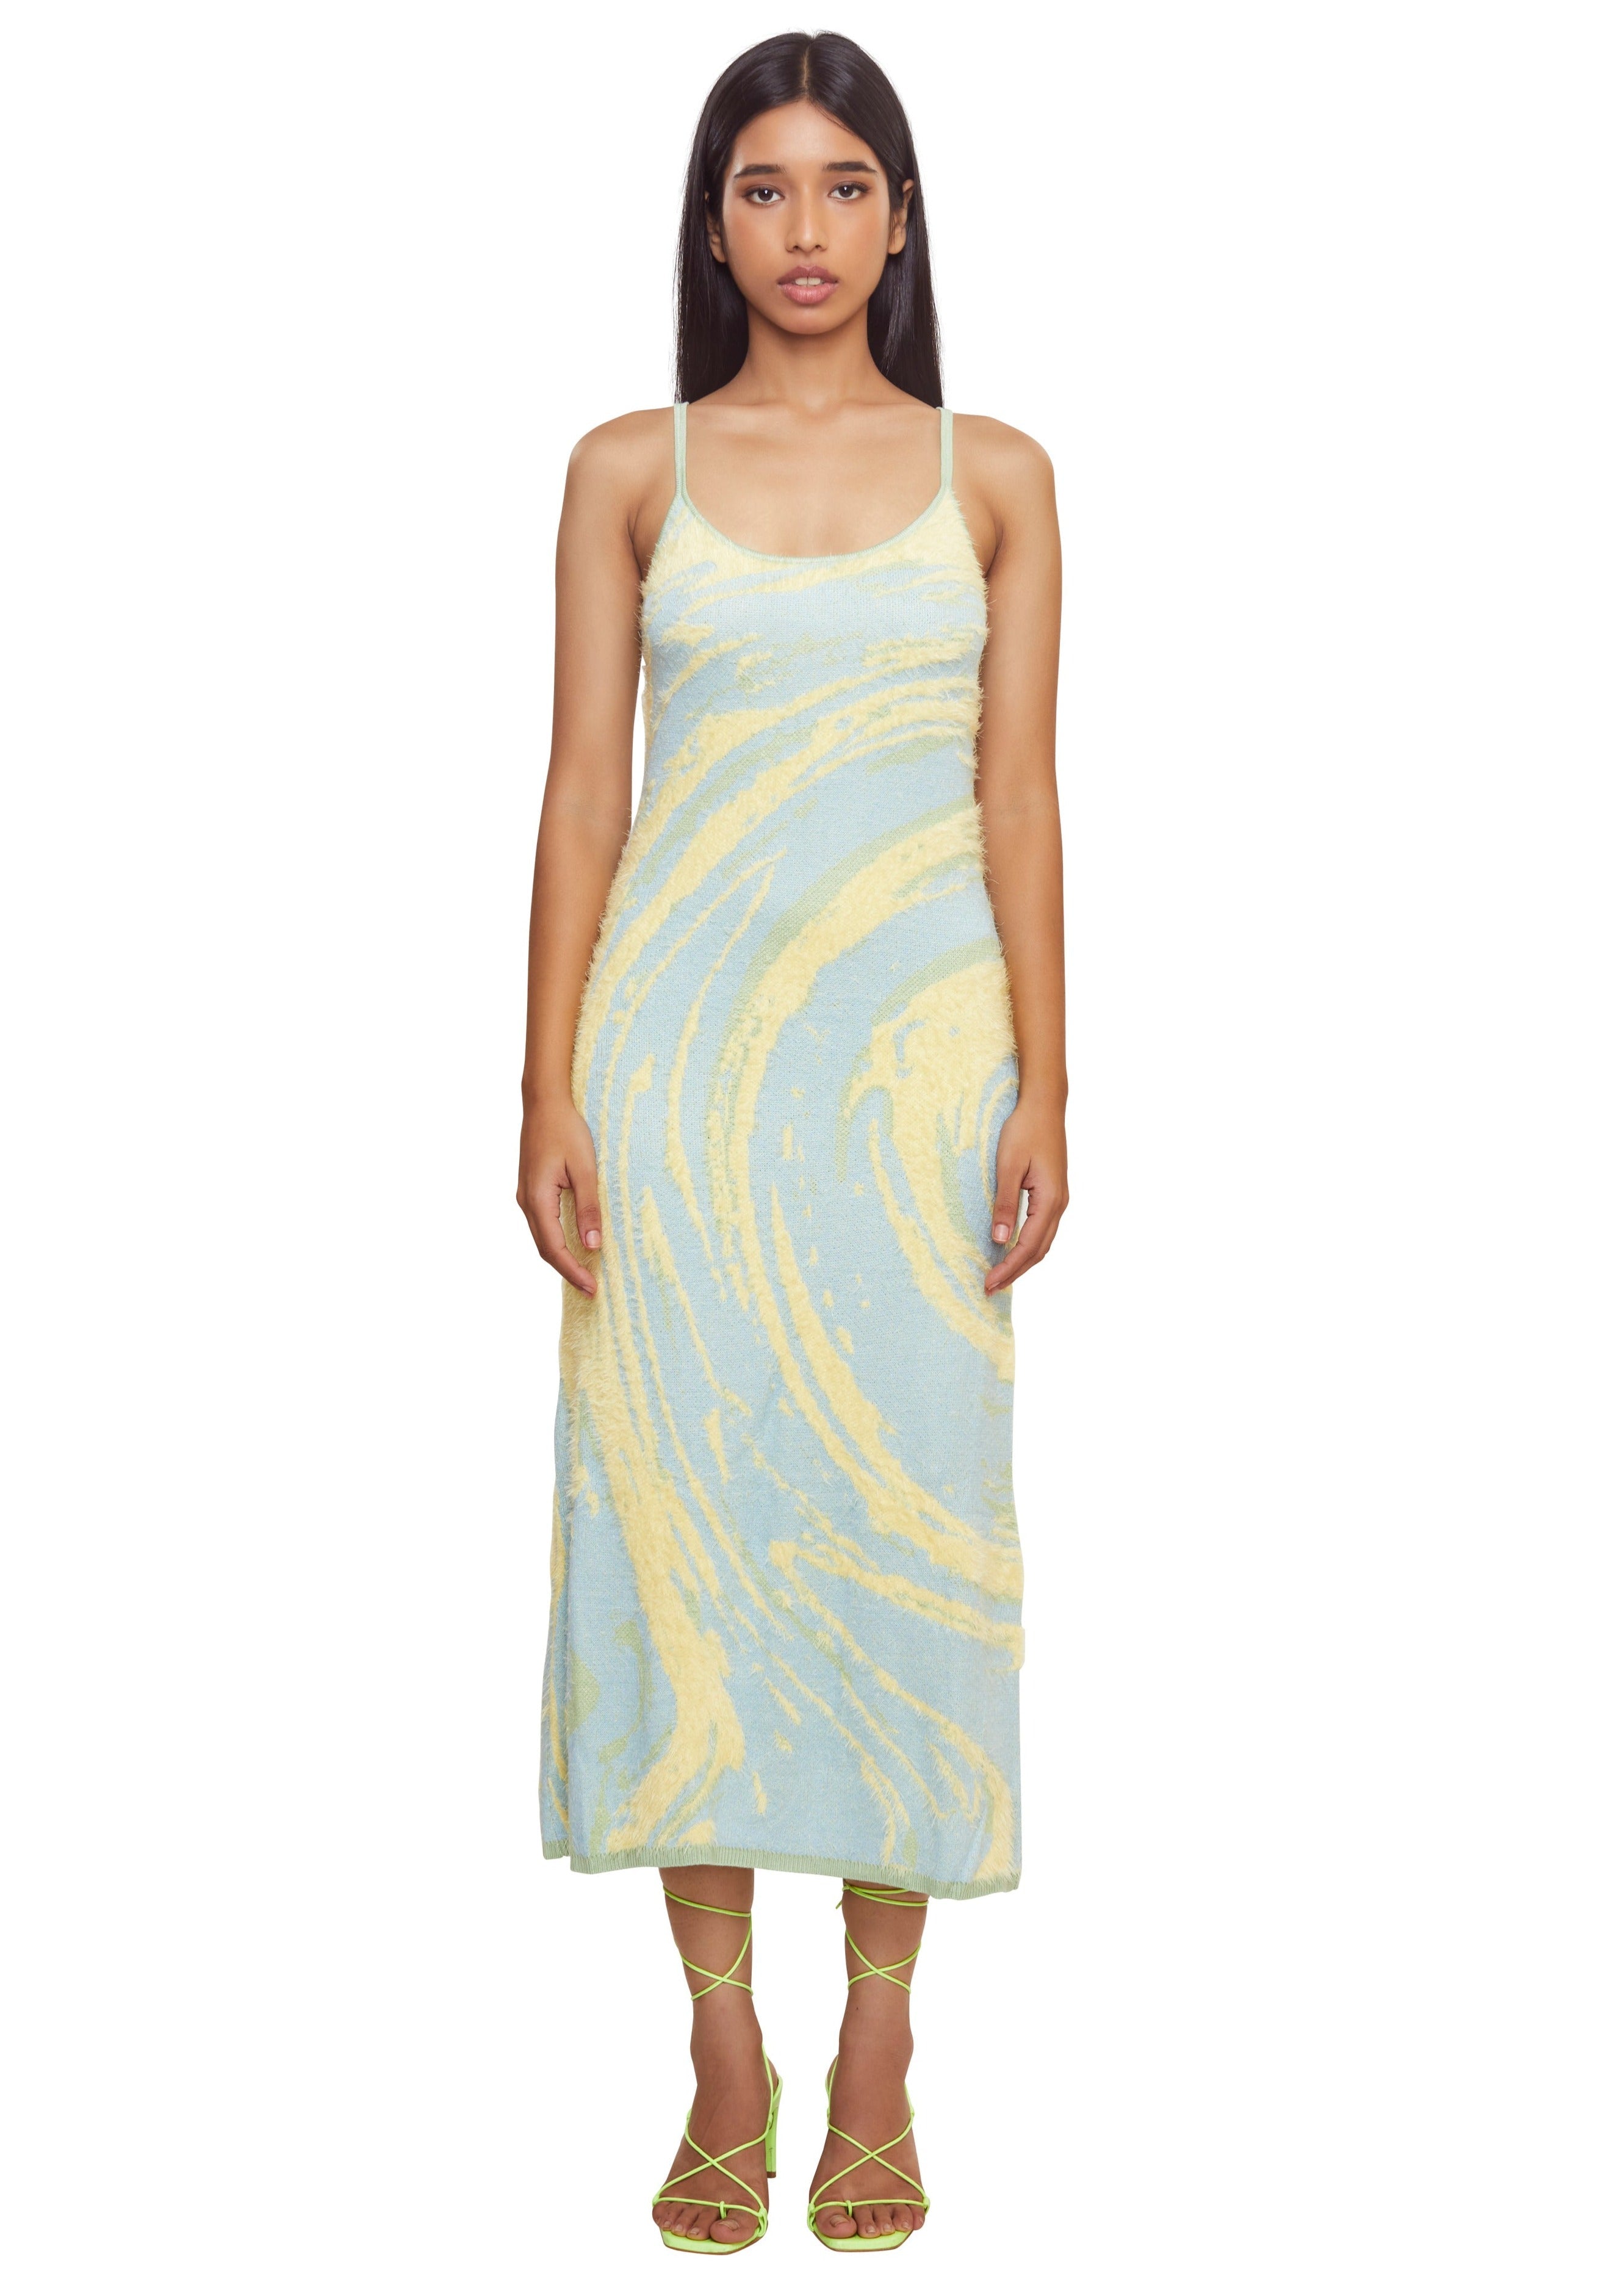 Blue and yellow classic super soft knitted hofs slip dress w/ swirl print inspired by a beautiful beach from the brand House Of Sunny